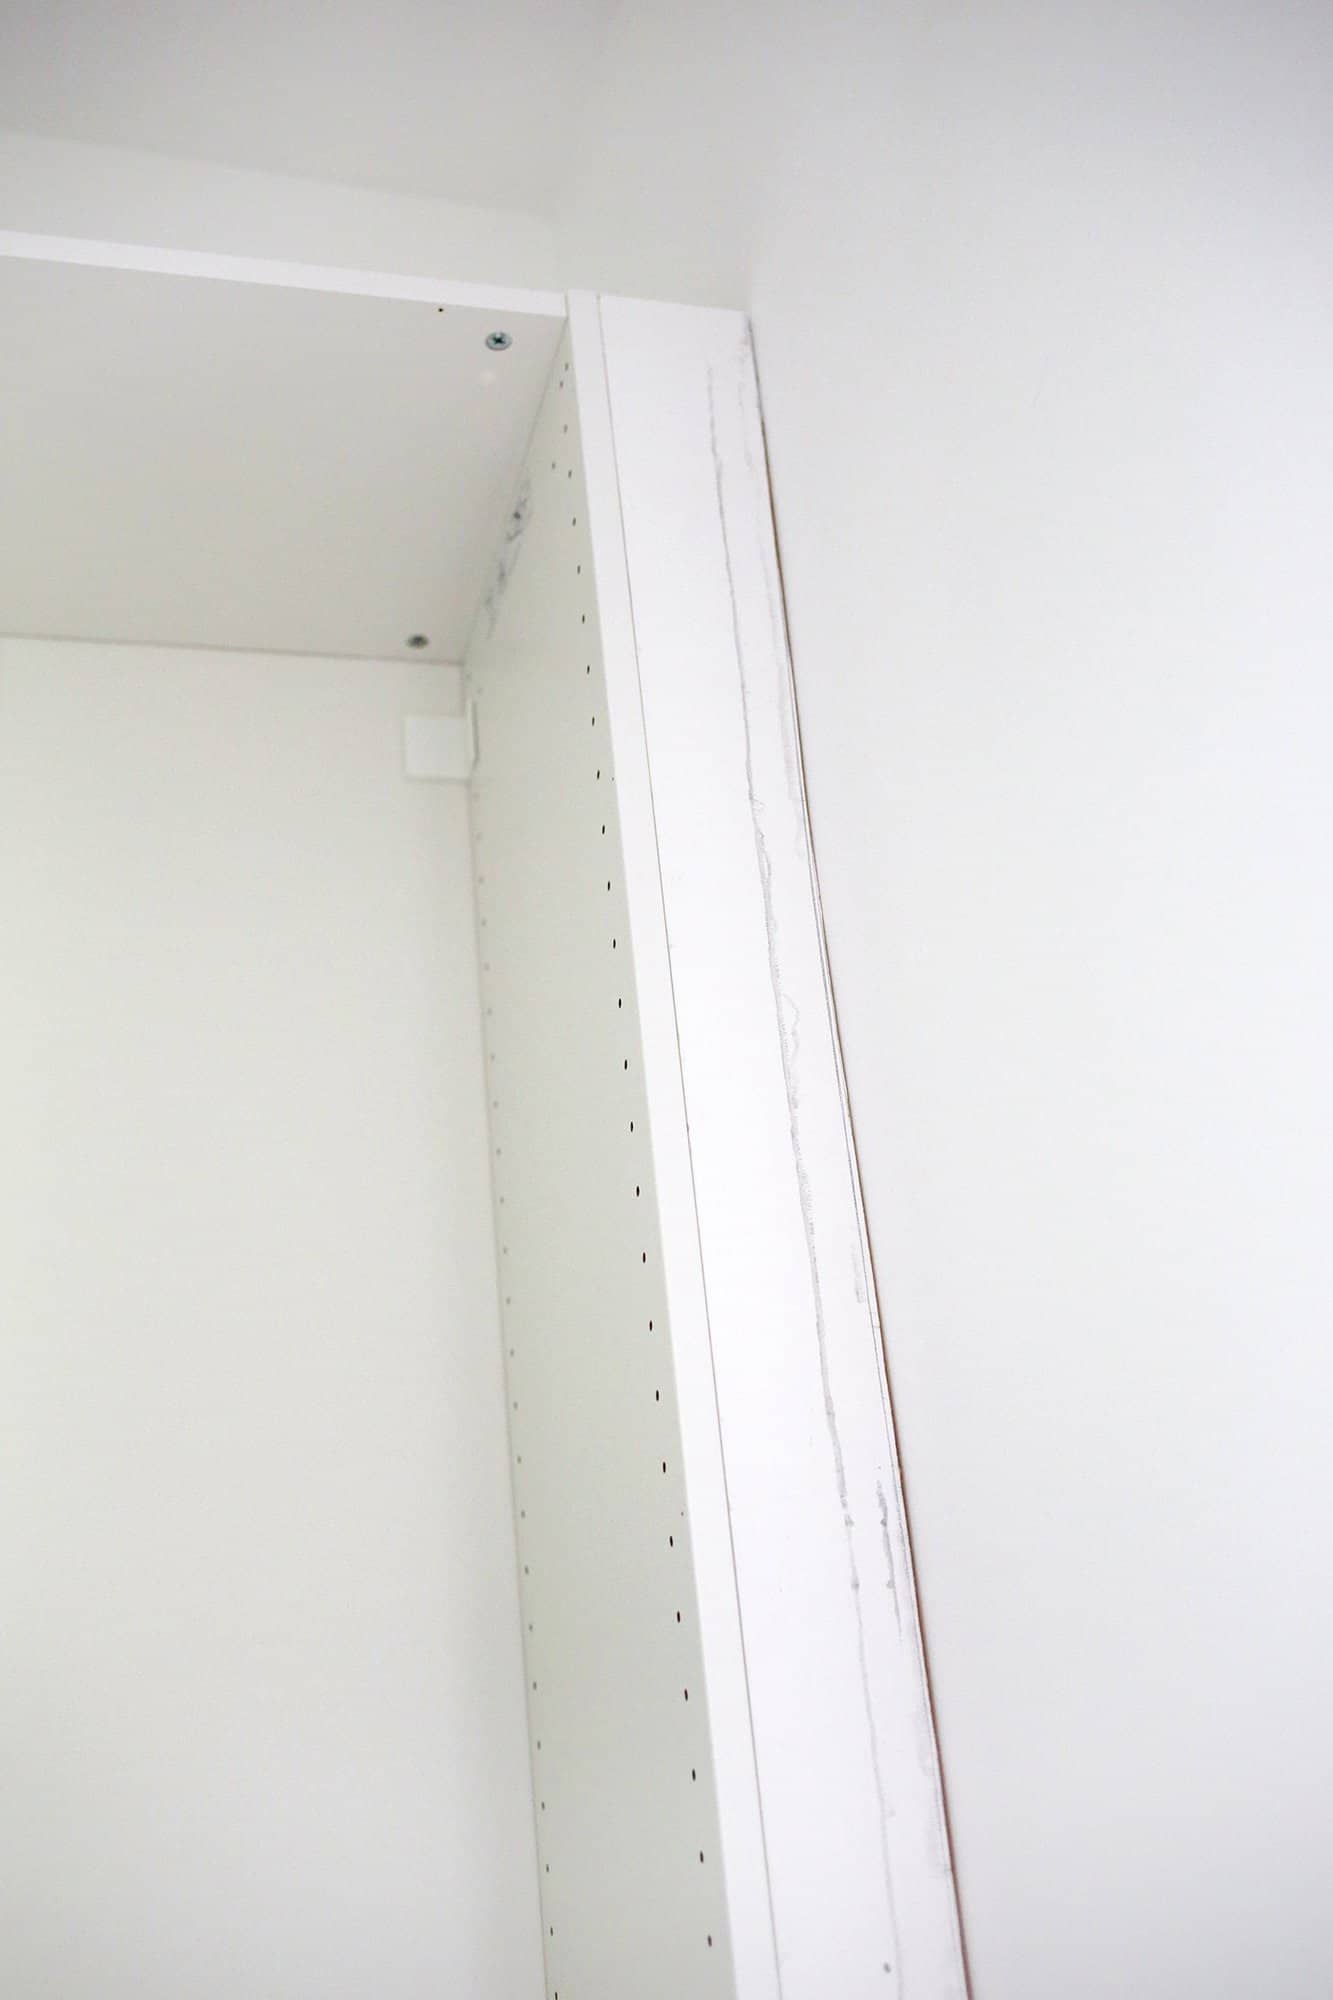 board filling in gap between closet and wall